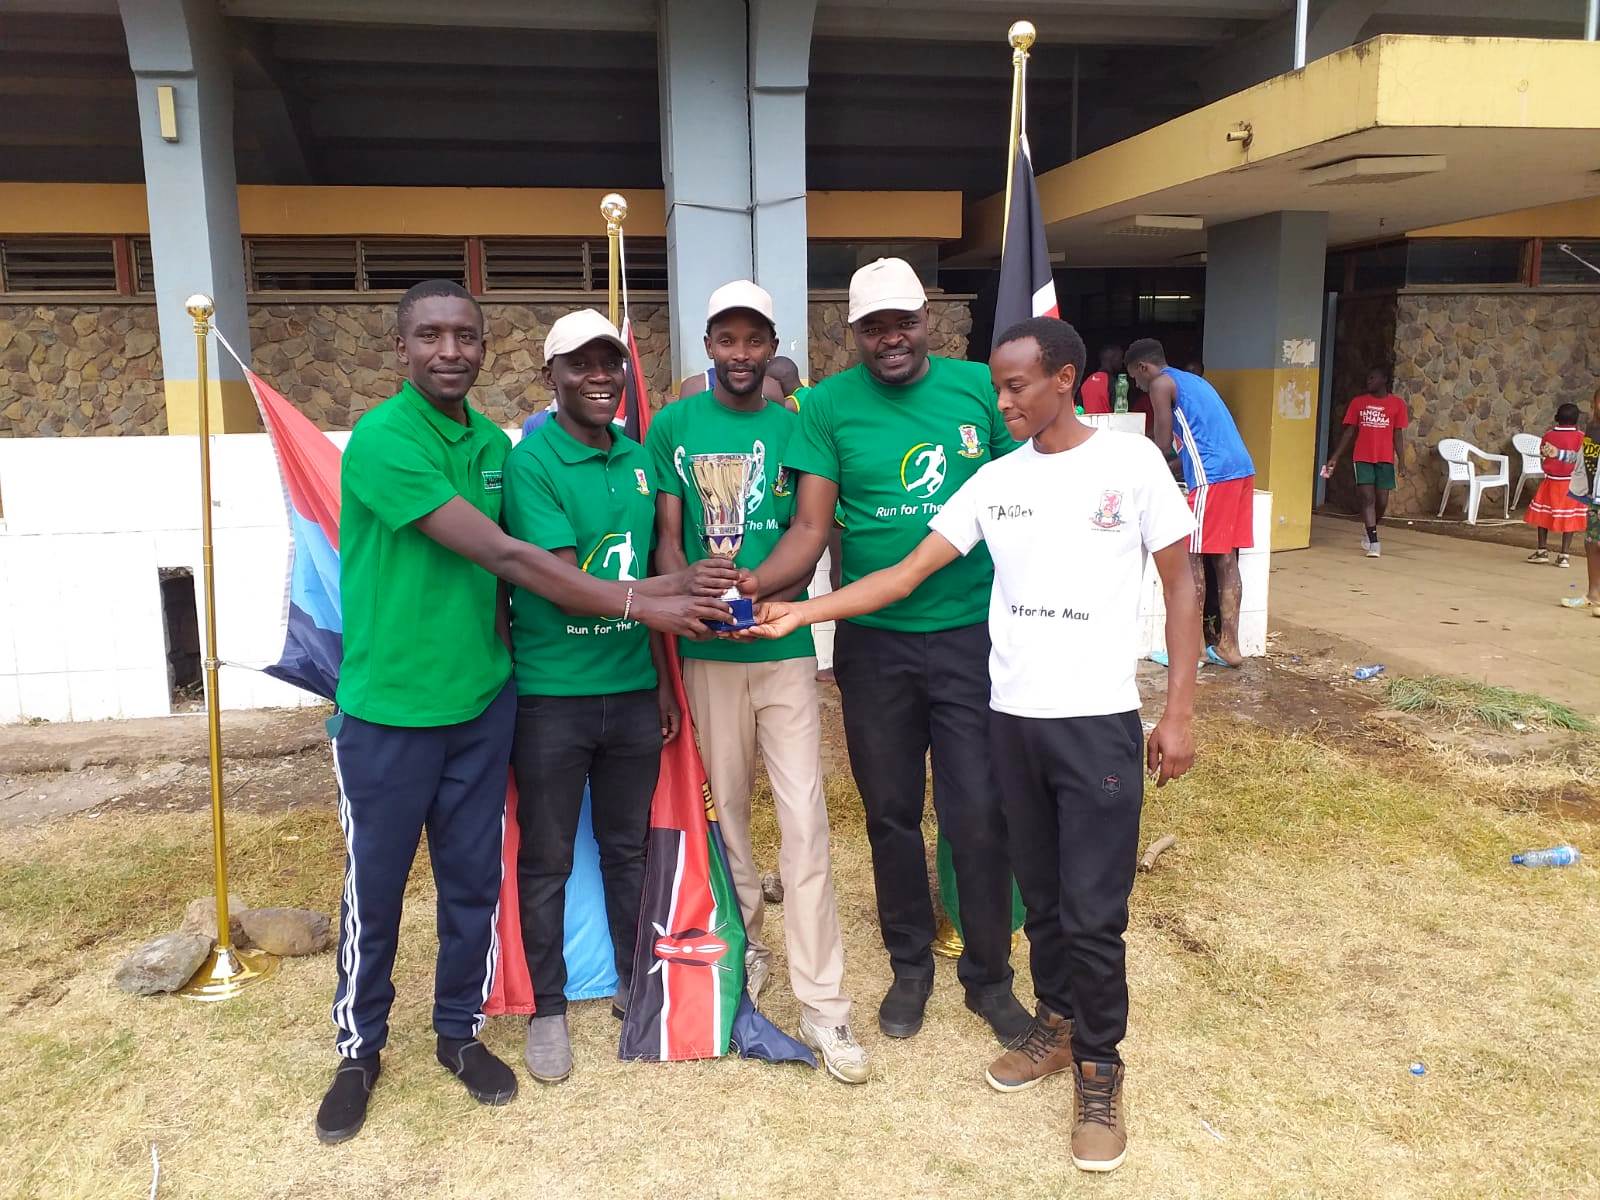 TAGDev Program emerged 2nd runner-up during the eighth edition of the Run for Mau-Egerton University Cross-Country